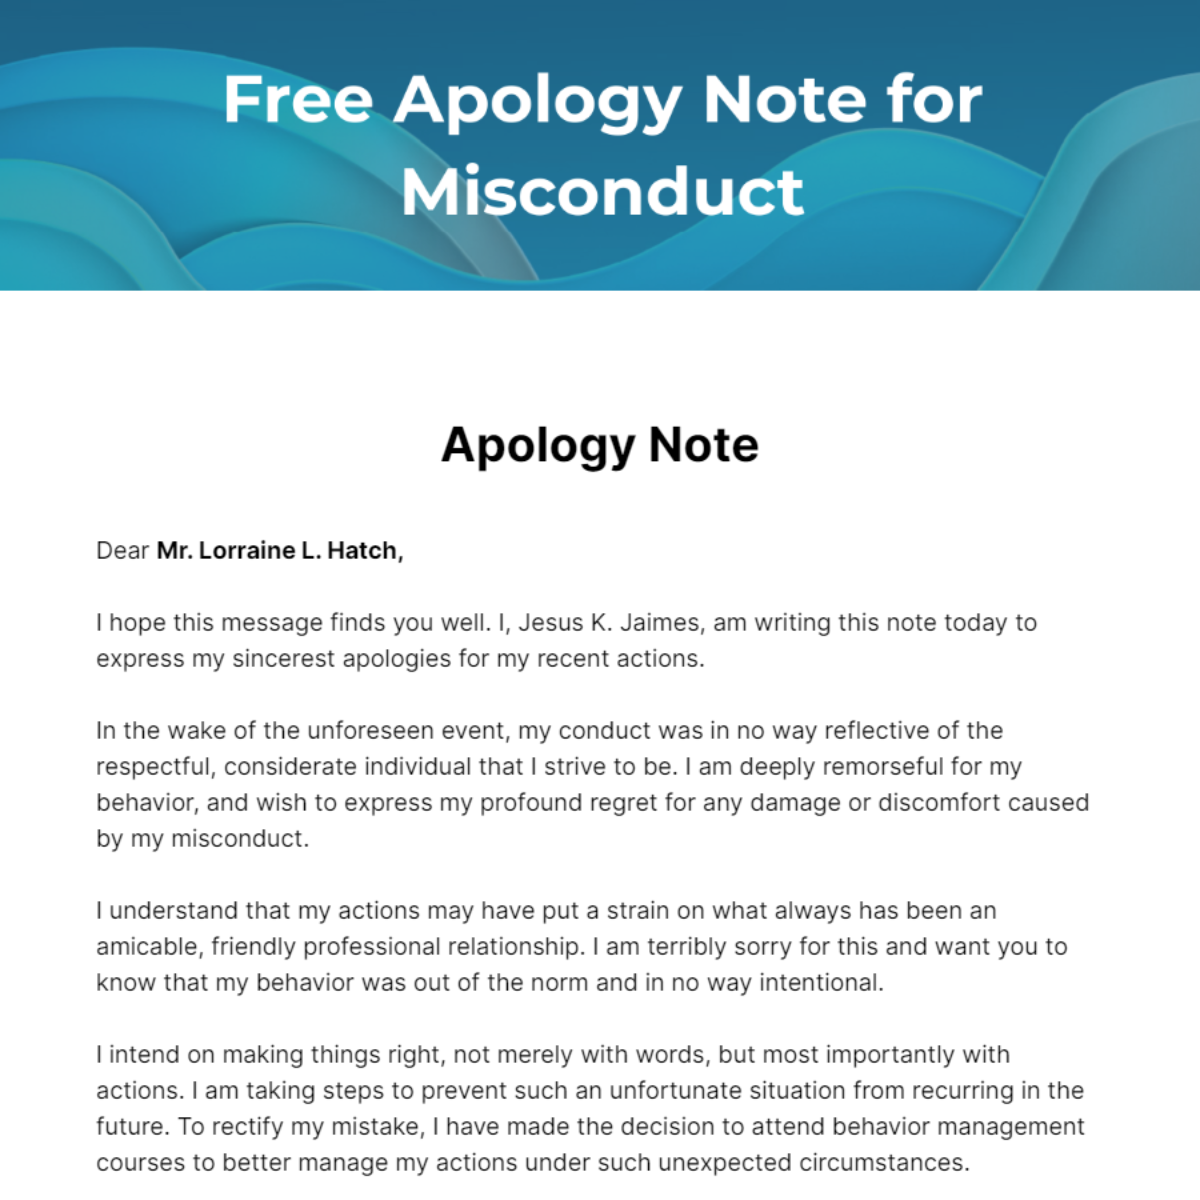 Apology Note for Misconduct Template